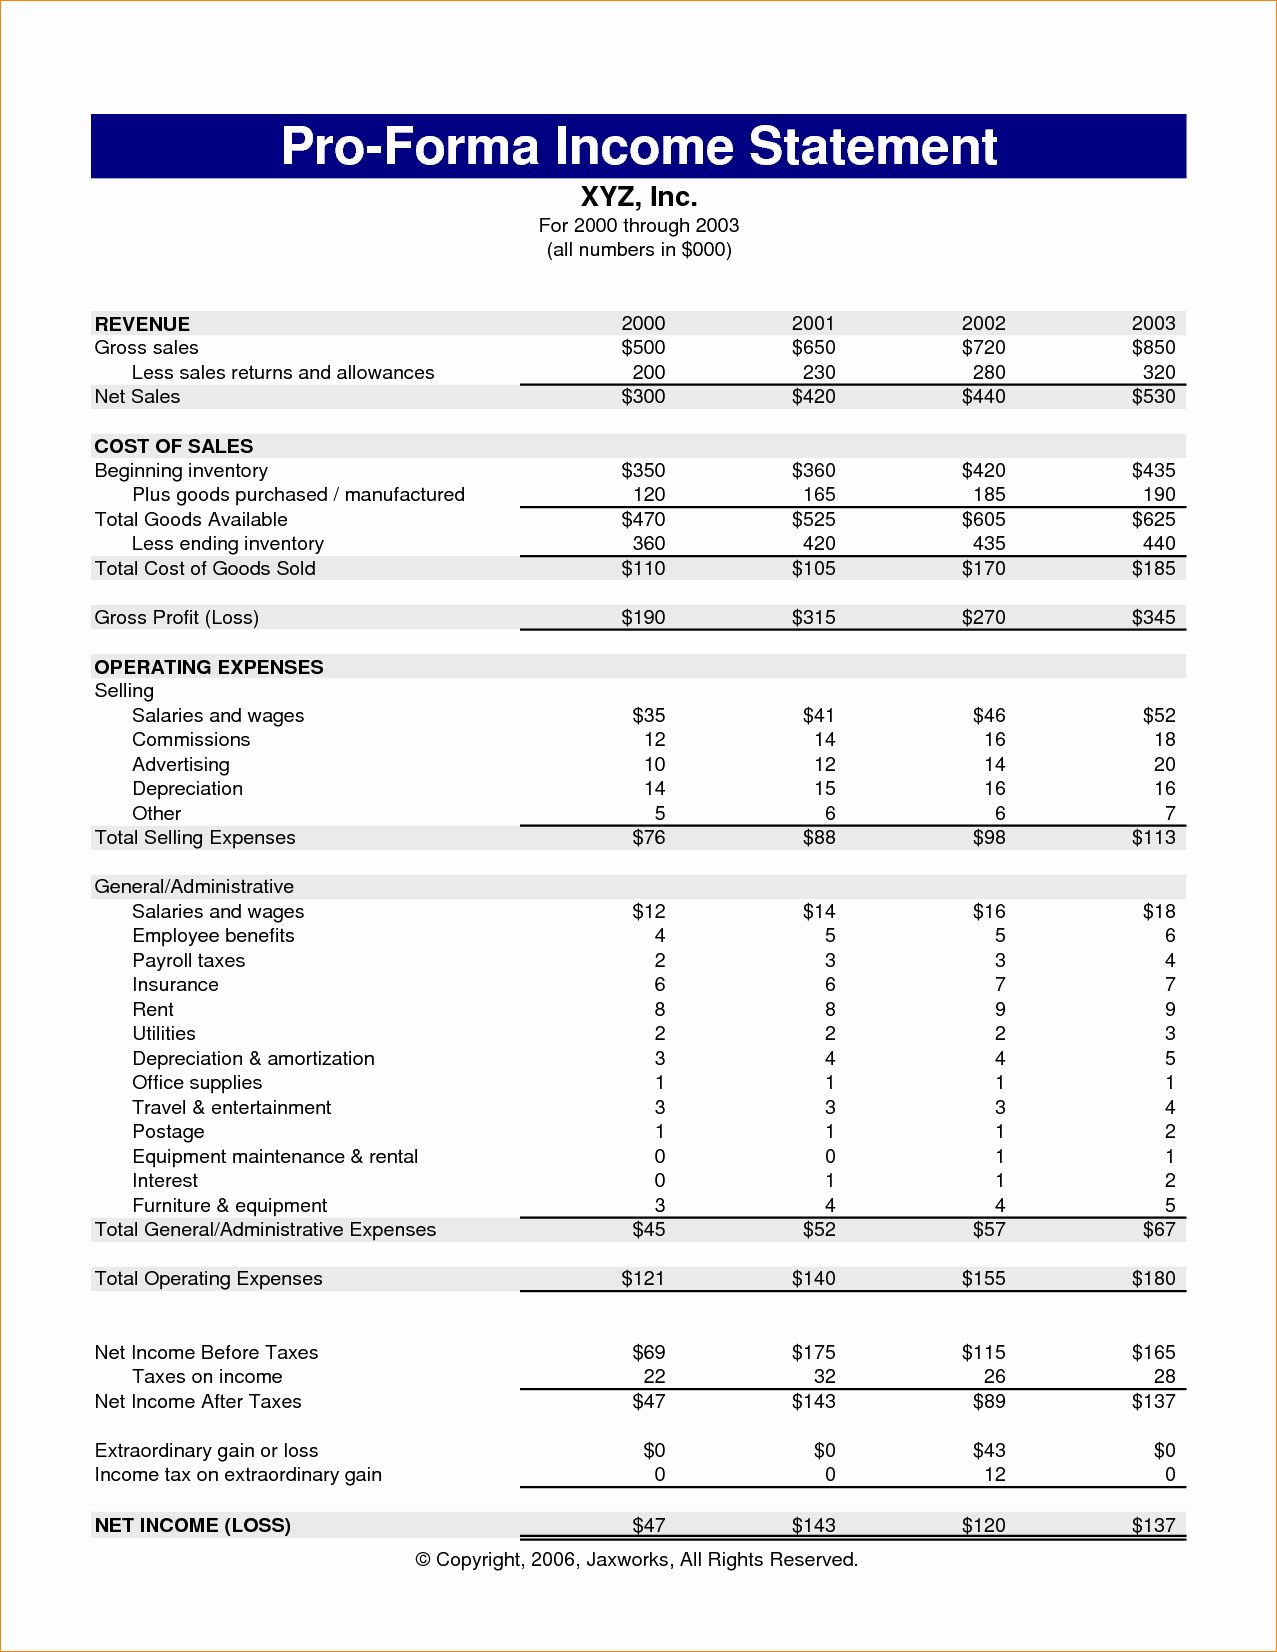 Sample Microsoft Excel pro forma income statement template